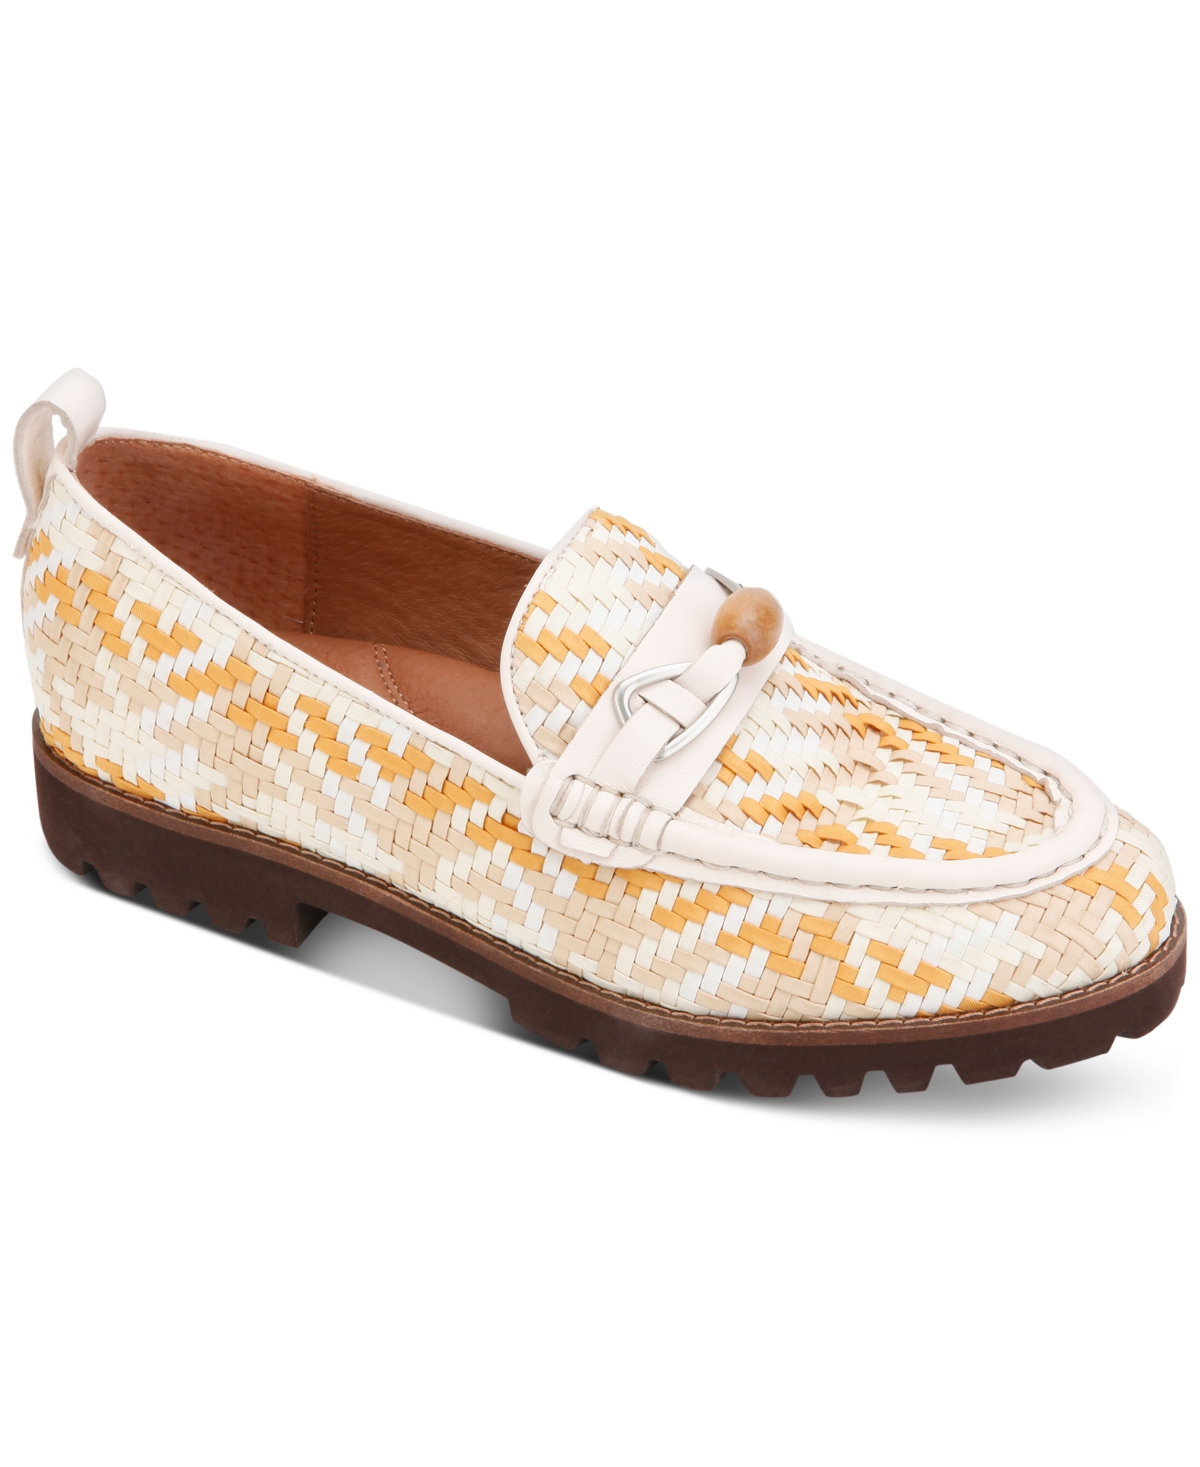 GENTLE SOULS BY KENNETH COLE EUGENE BEADED BIT-TRIM LOAFERS WOMEN'S SHOES